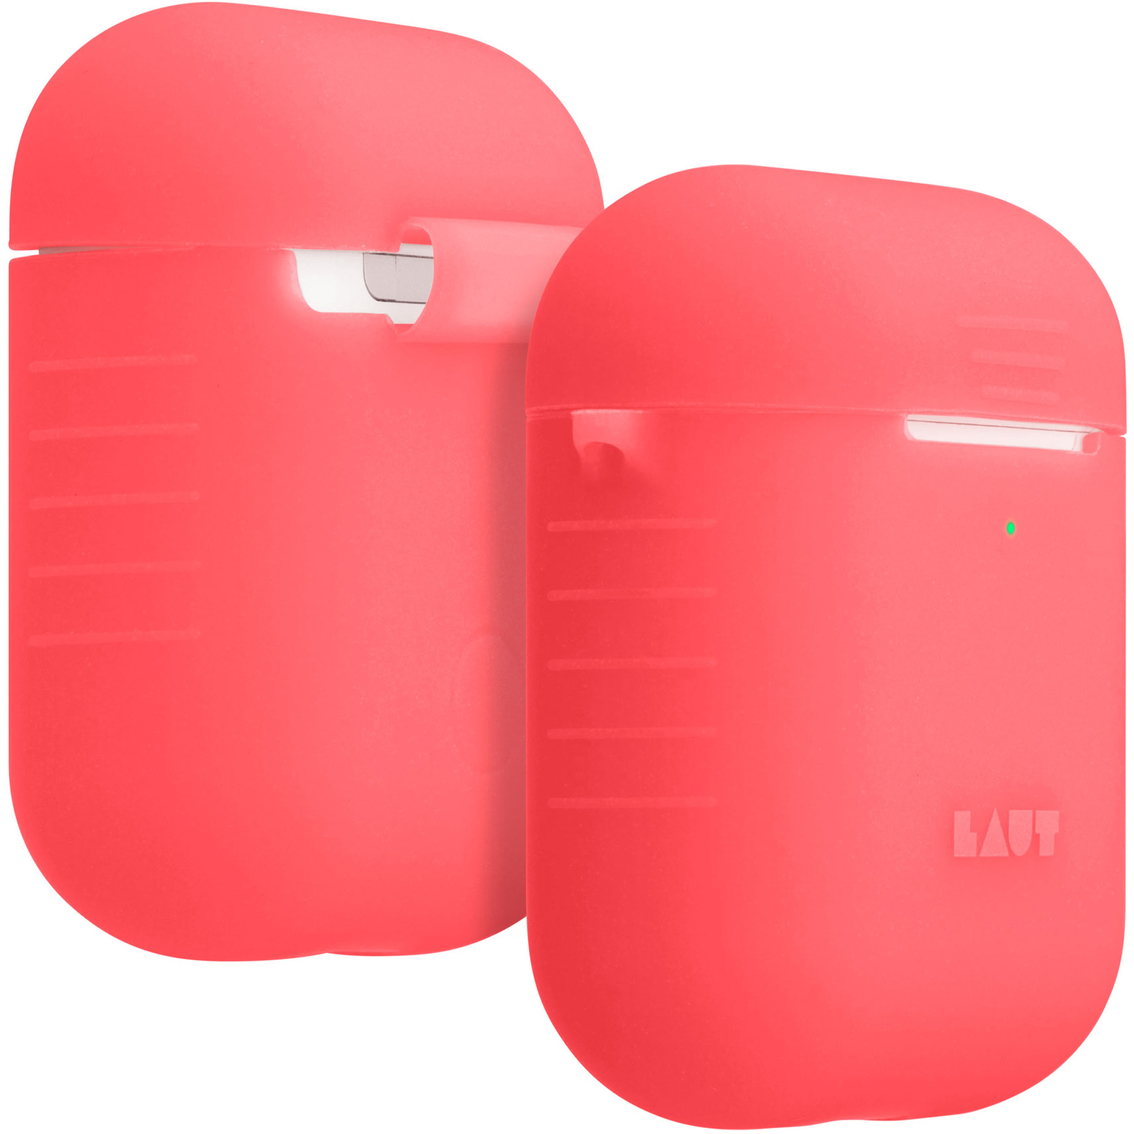 Laut Pod Neon Case for Apple AirPods - Image 2 of 5